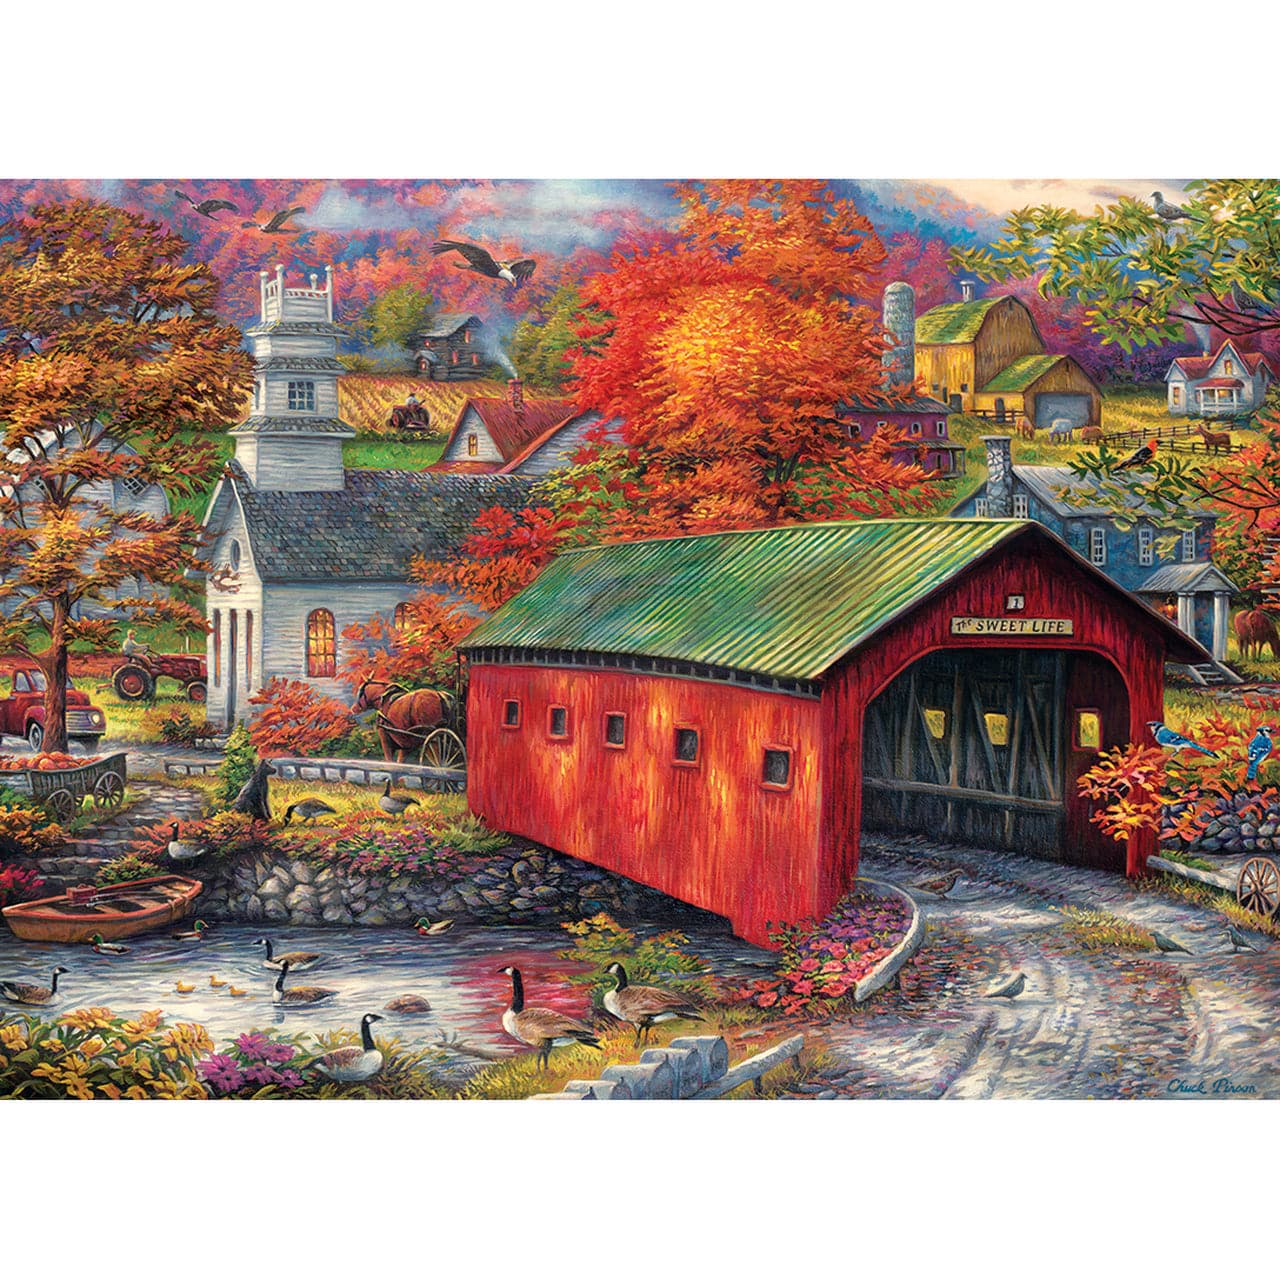 Chuck Pinson Art Gallery - The Sweet Life - 1000 Piece Puzzle